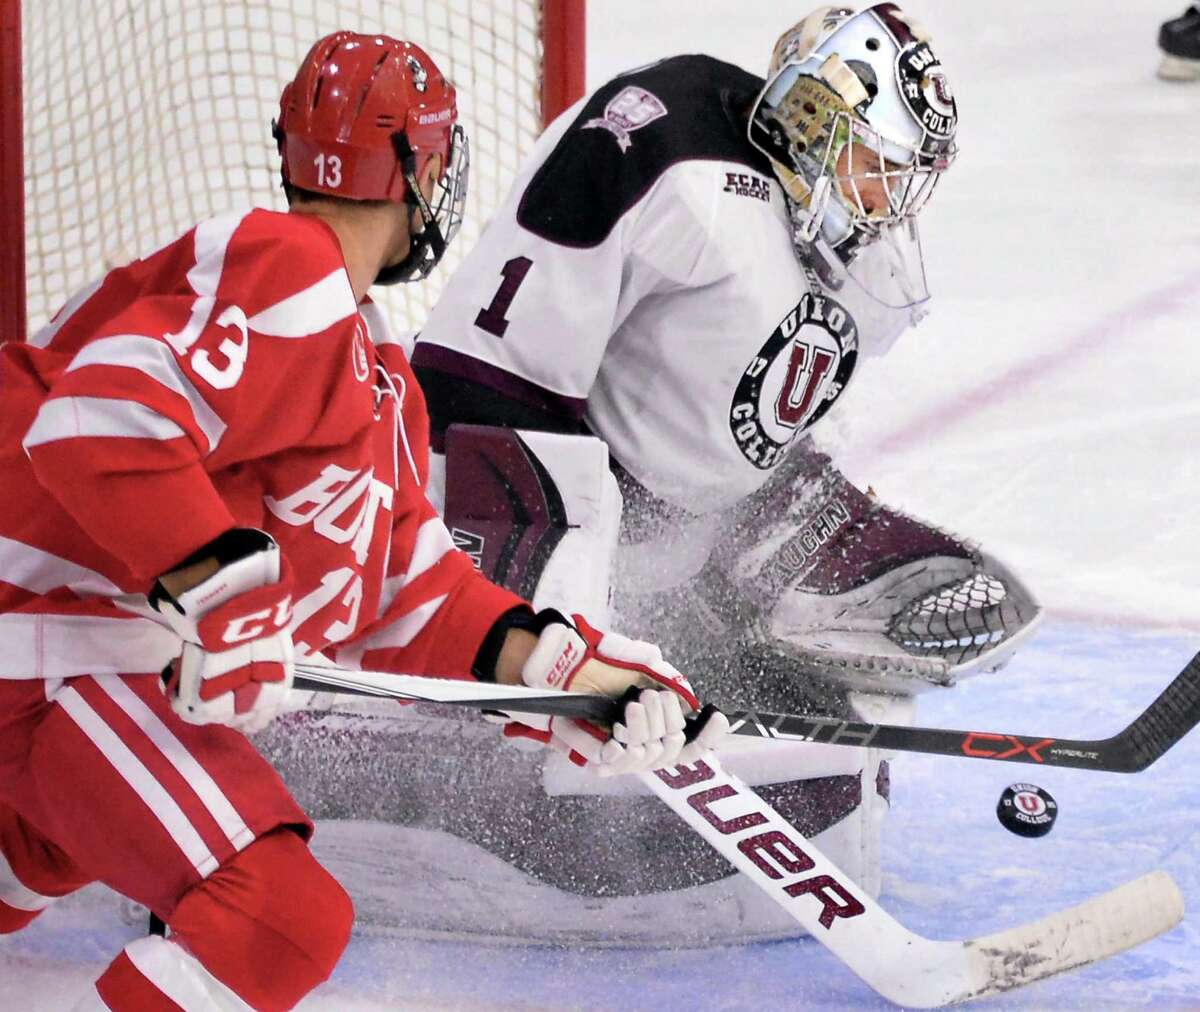 Union goalie Alex Sakellaropoulos stops a shot by Boston University's #13 Nikolas Olsson, left, during Saturday's game at Messa Rink Oct. 10, 2015 in Schenectady, NY. (John Carl D'Annibale / Times Union)